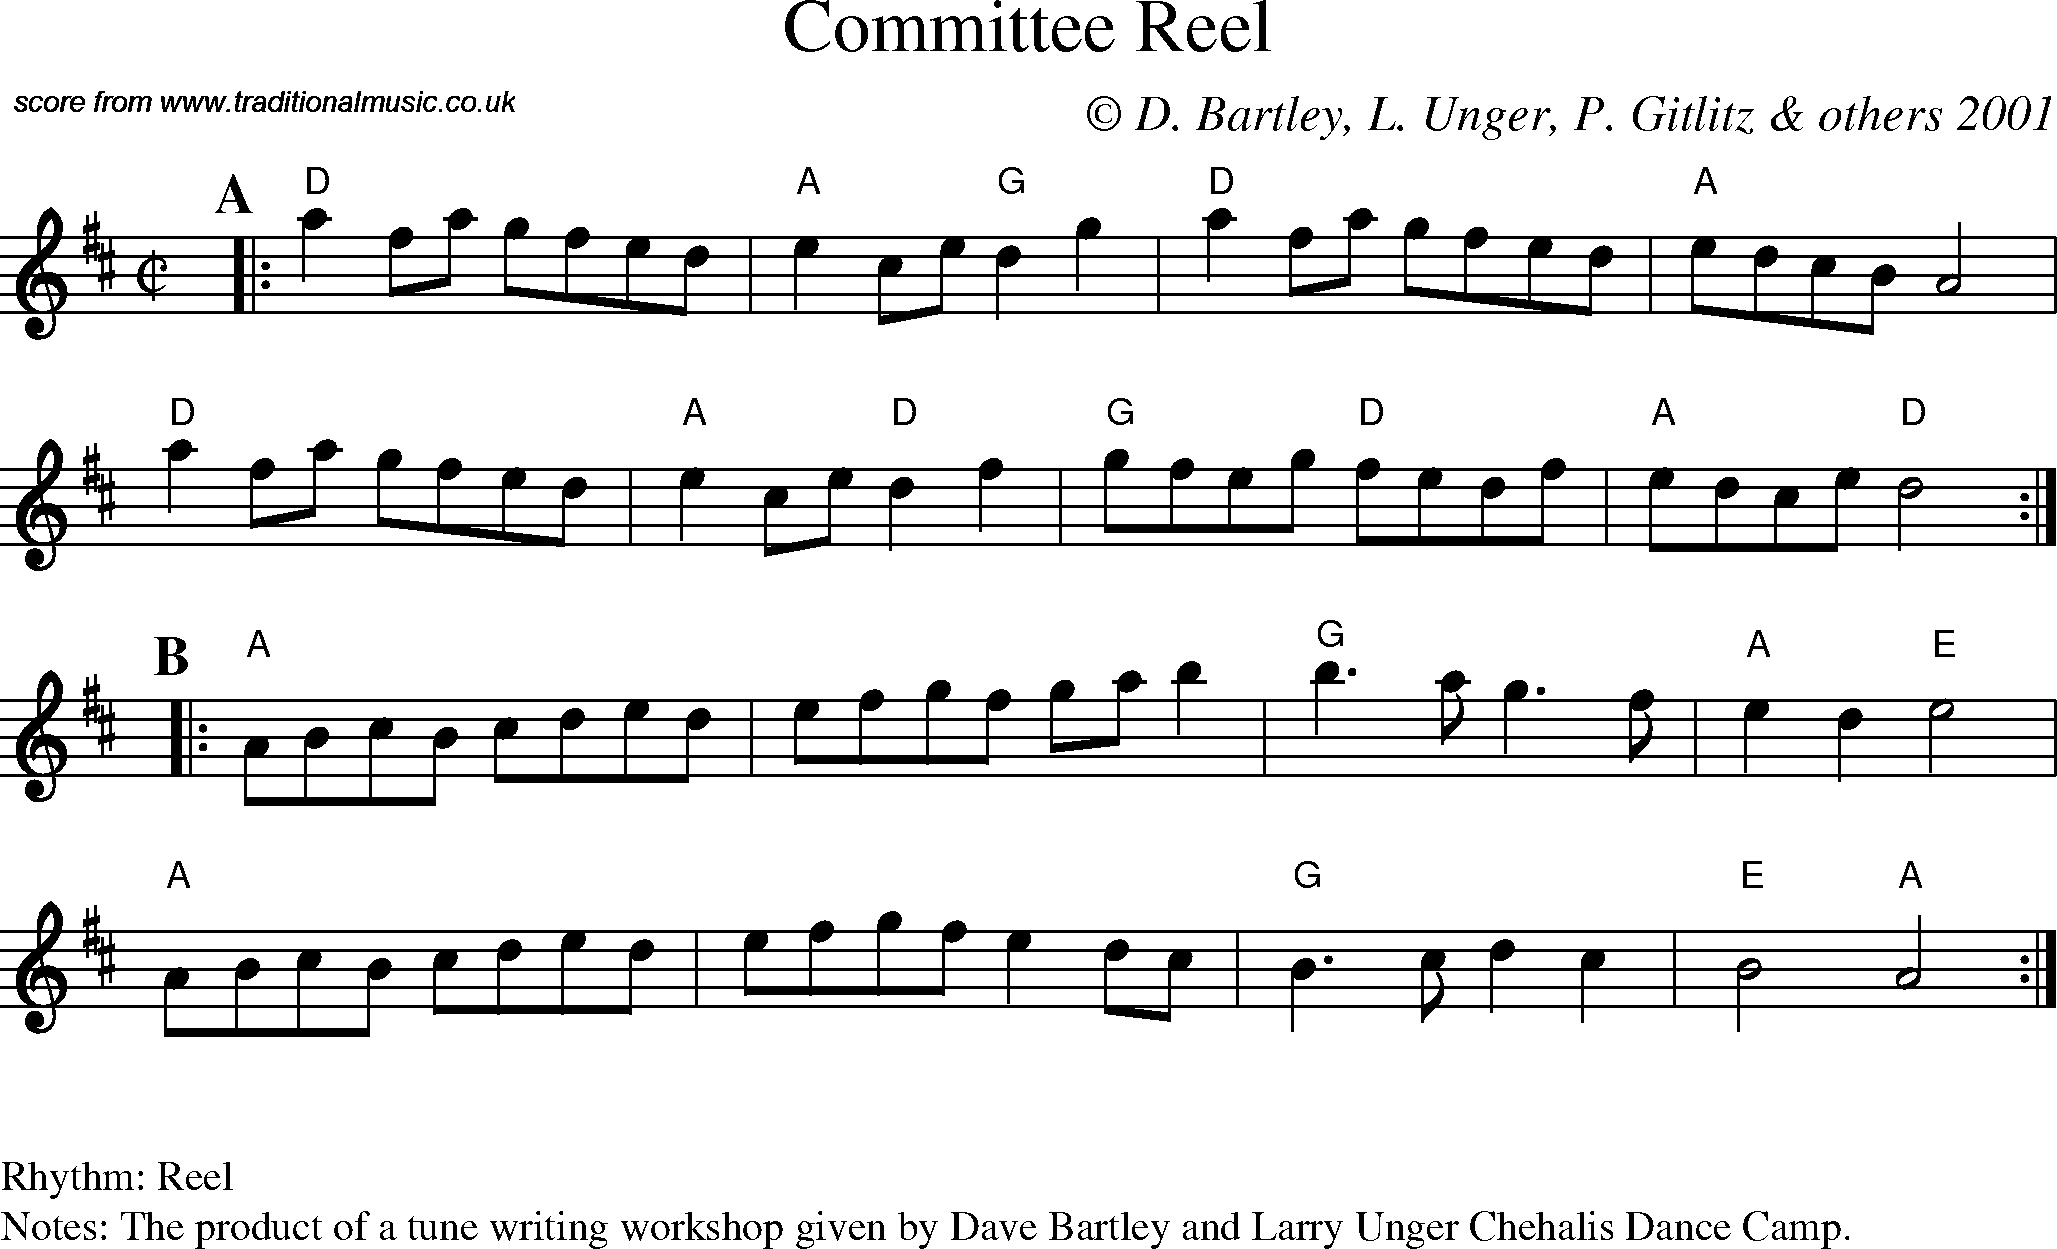 Sheet Music Score for Reel - Committee Reel.abc